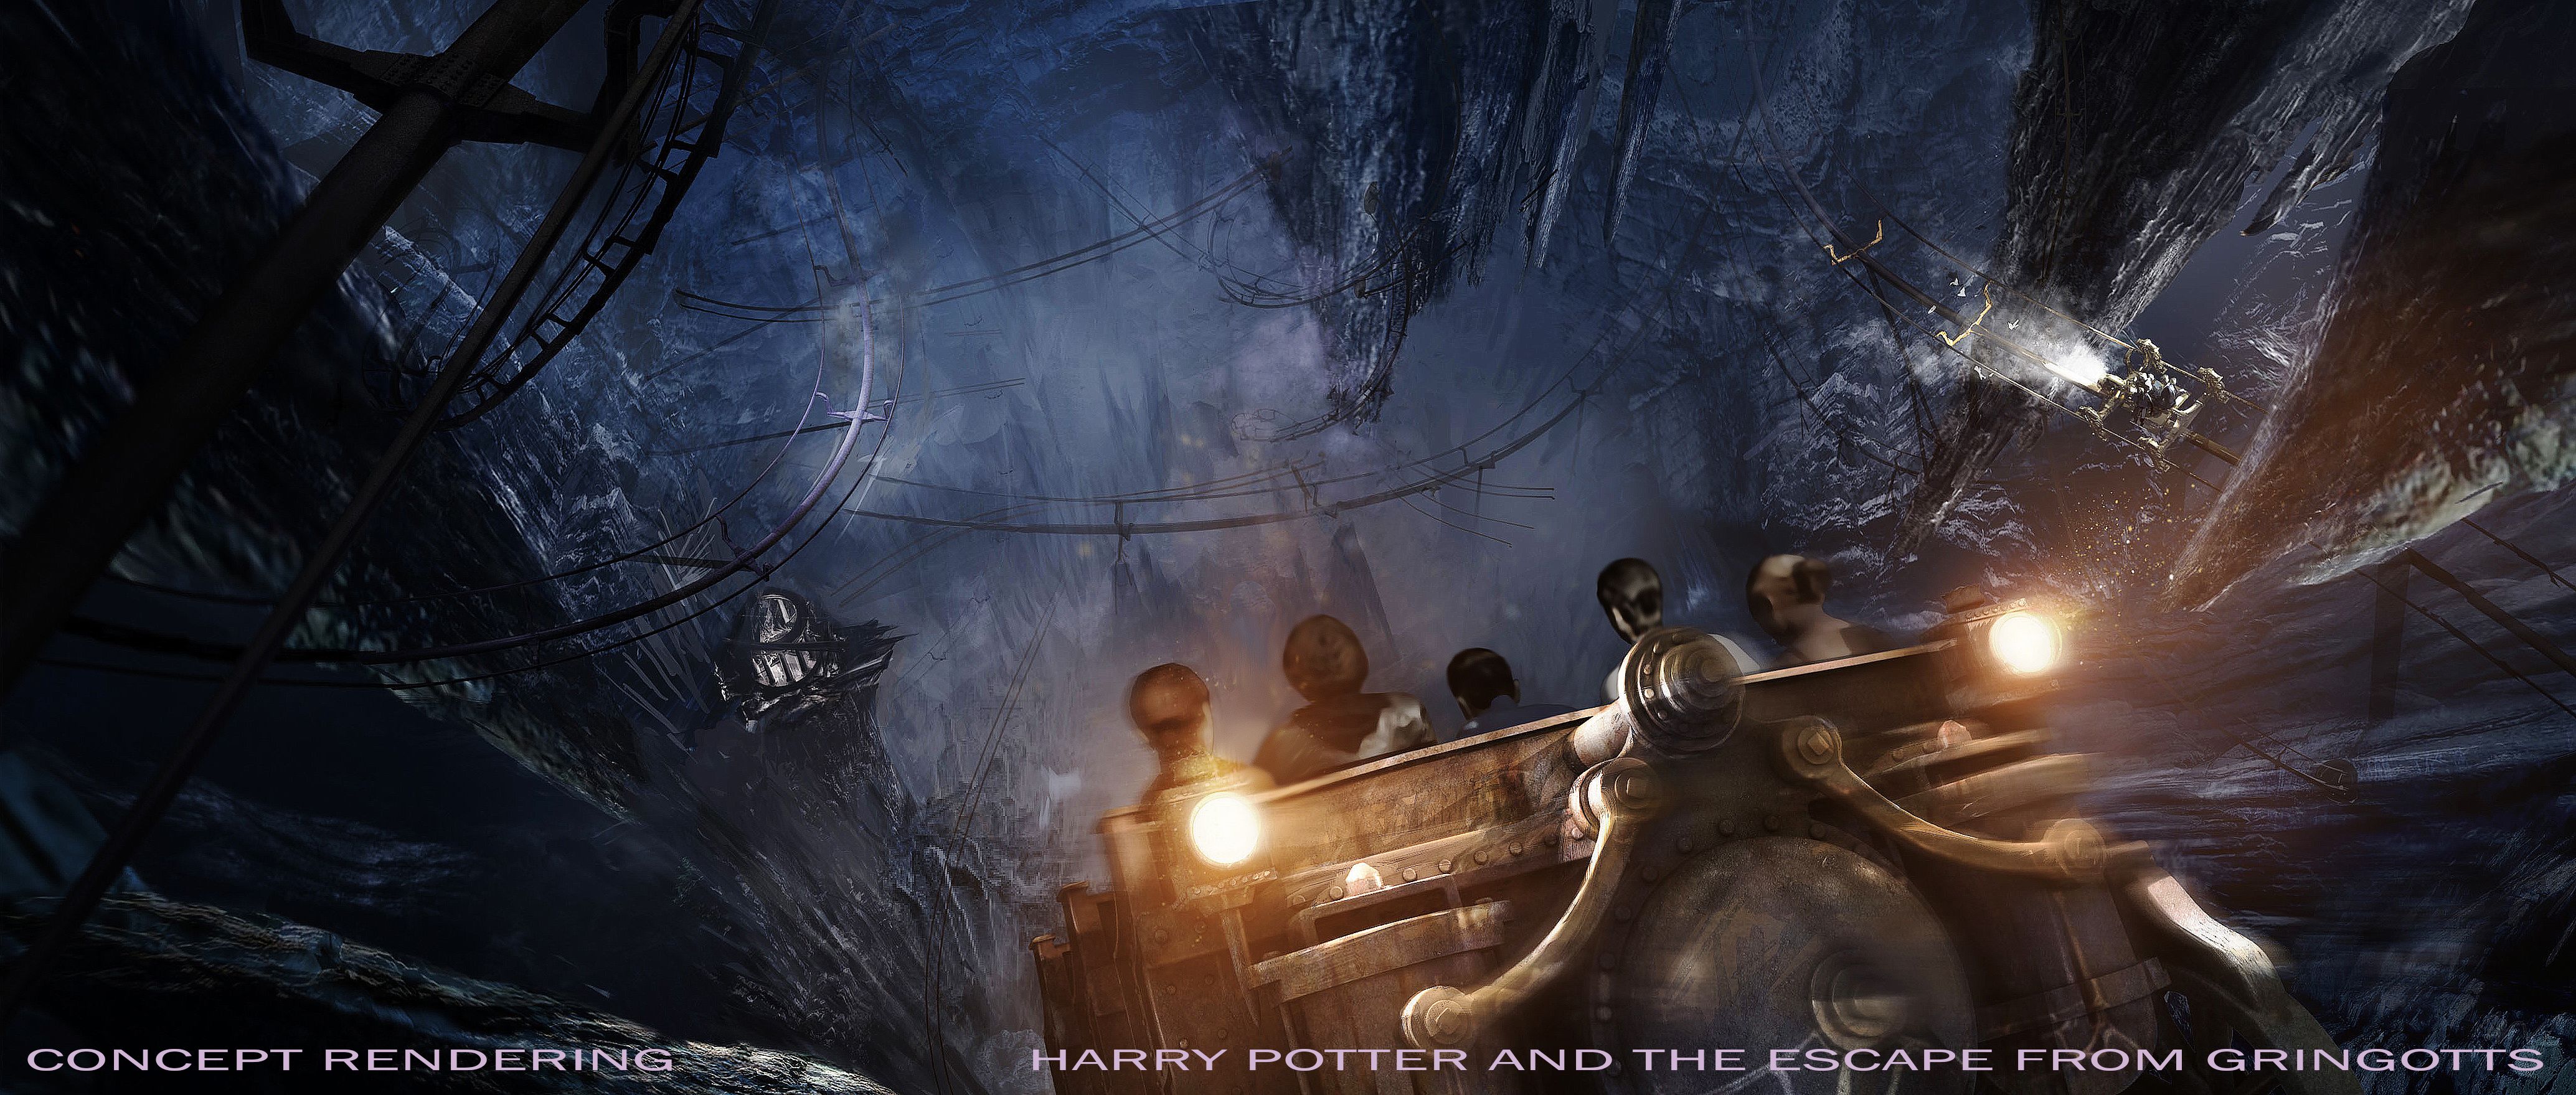 Visions of The Wizarding World of Harry Potter